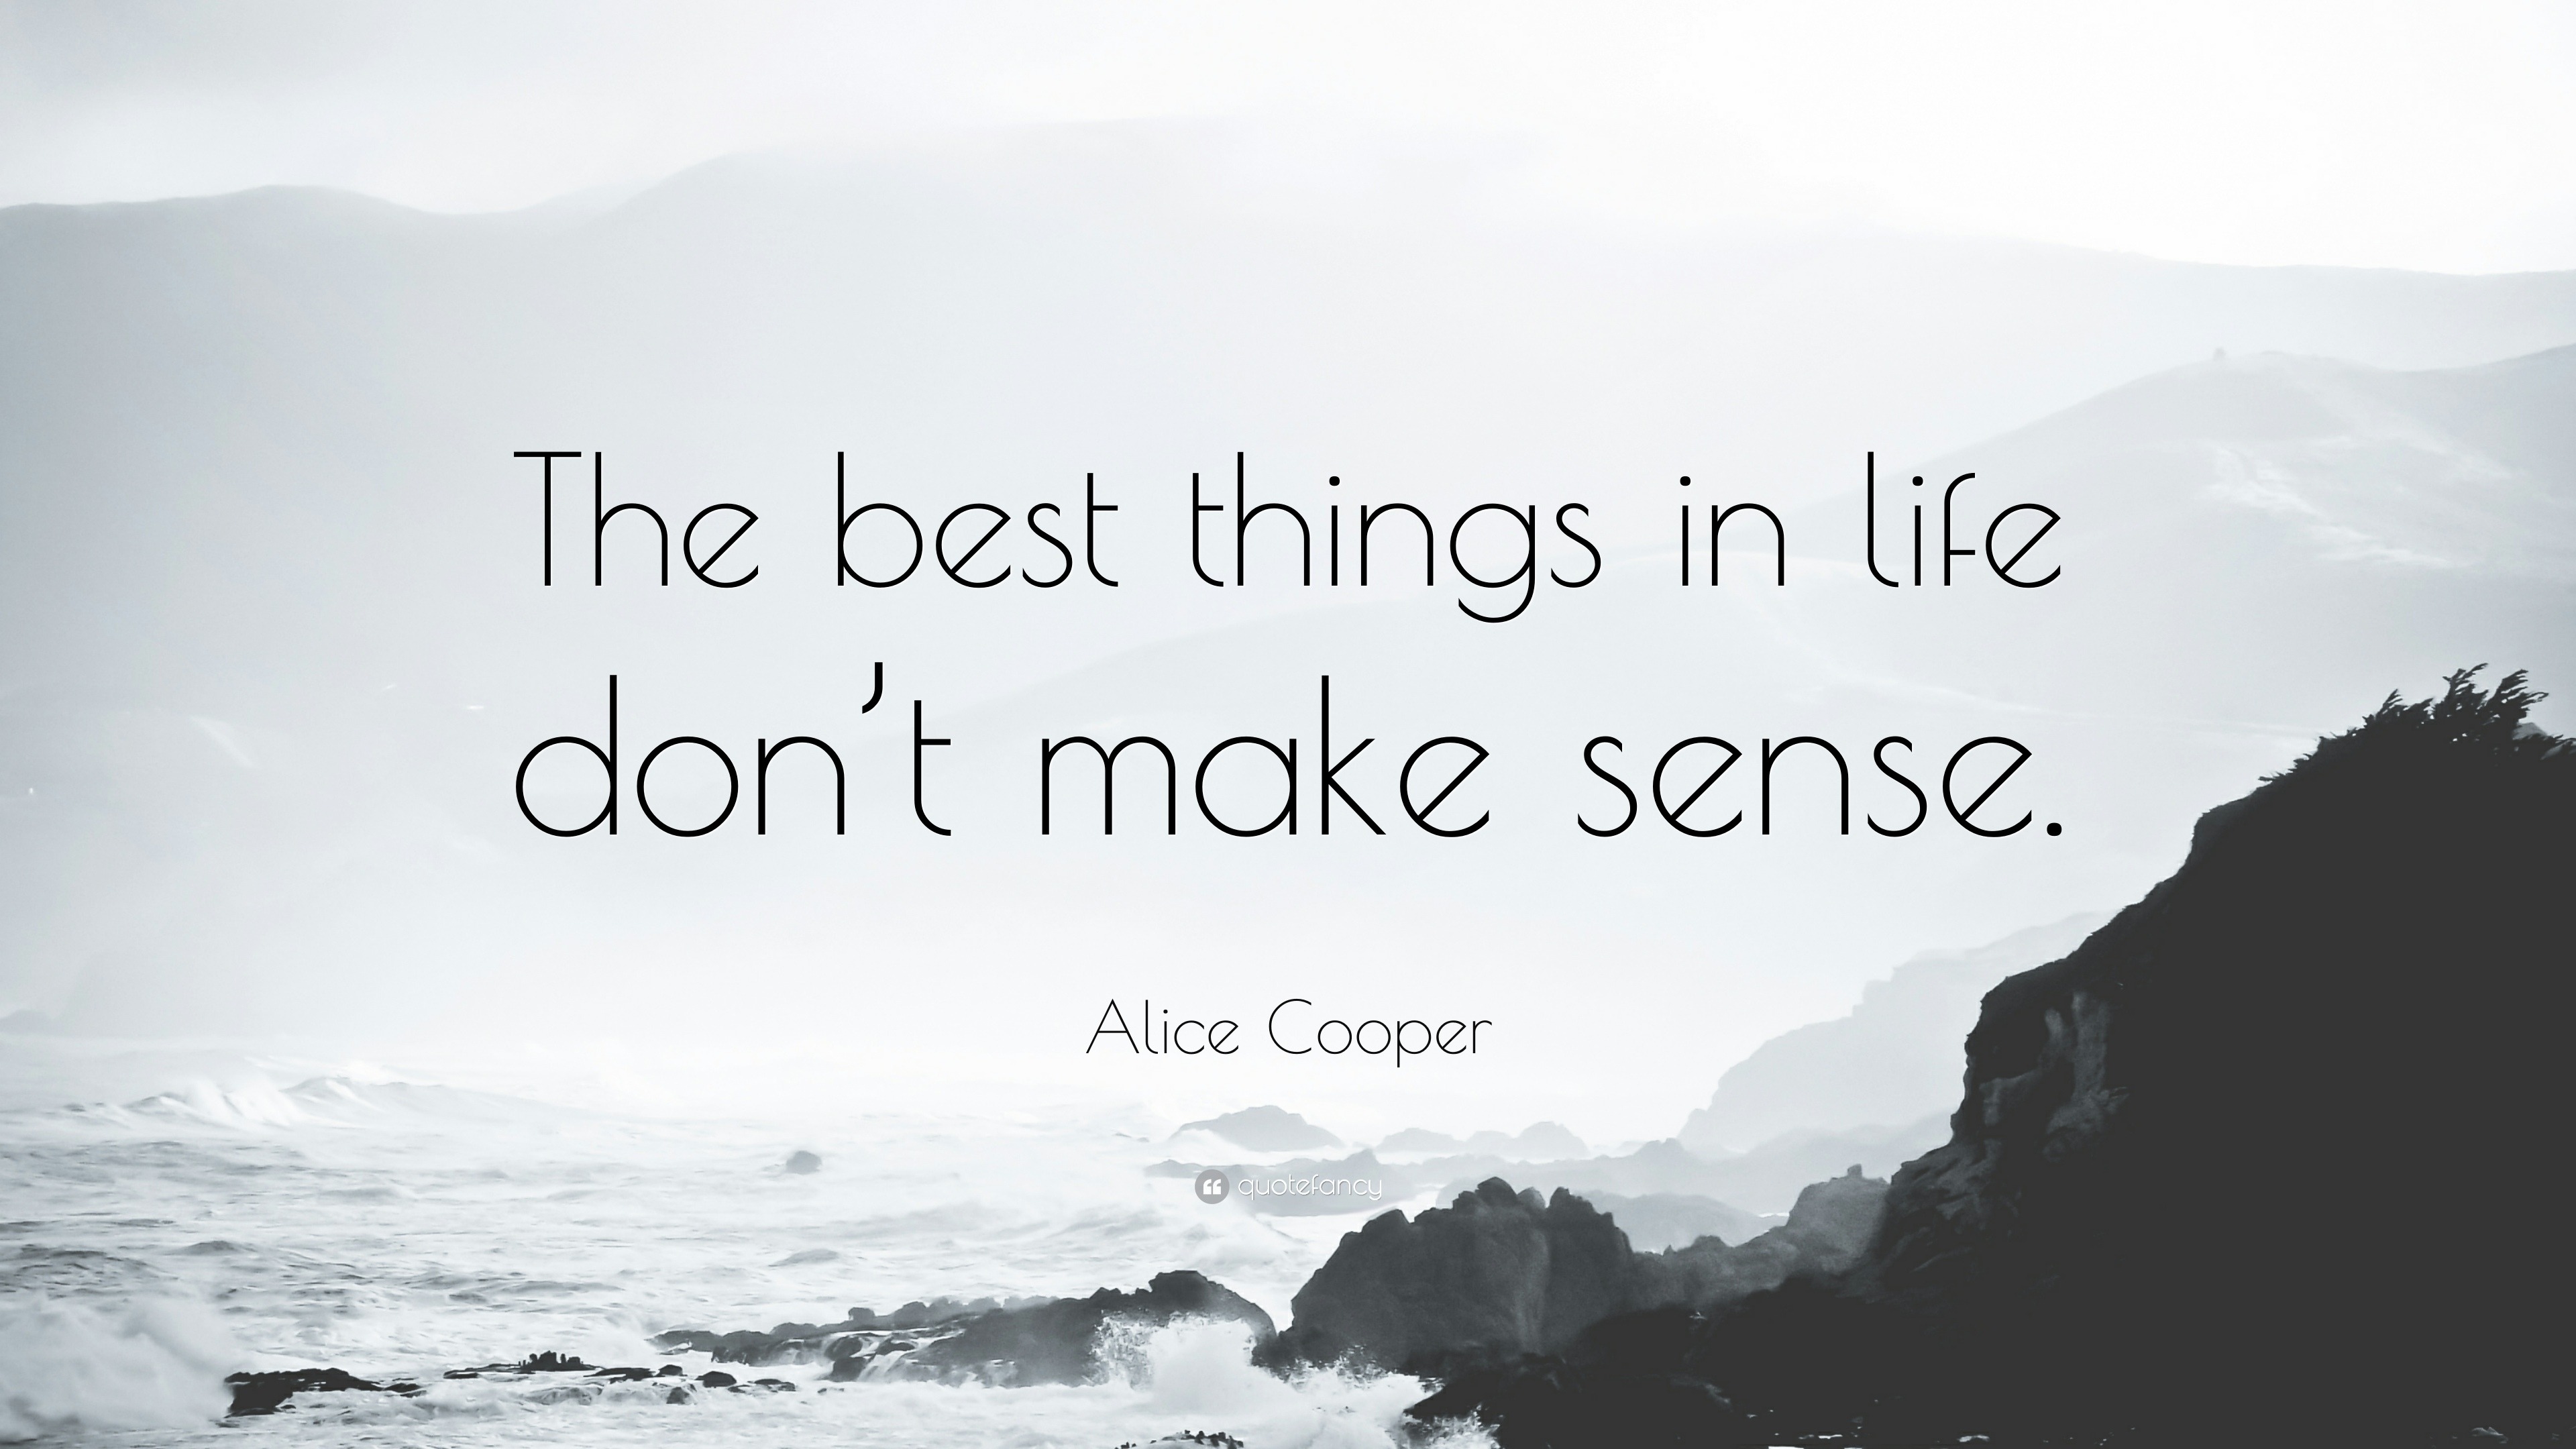 Alice Cooper Quote: “The Best Things In Life Don't Make Sense.”